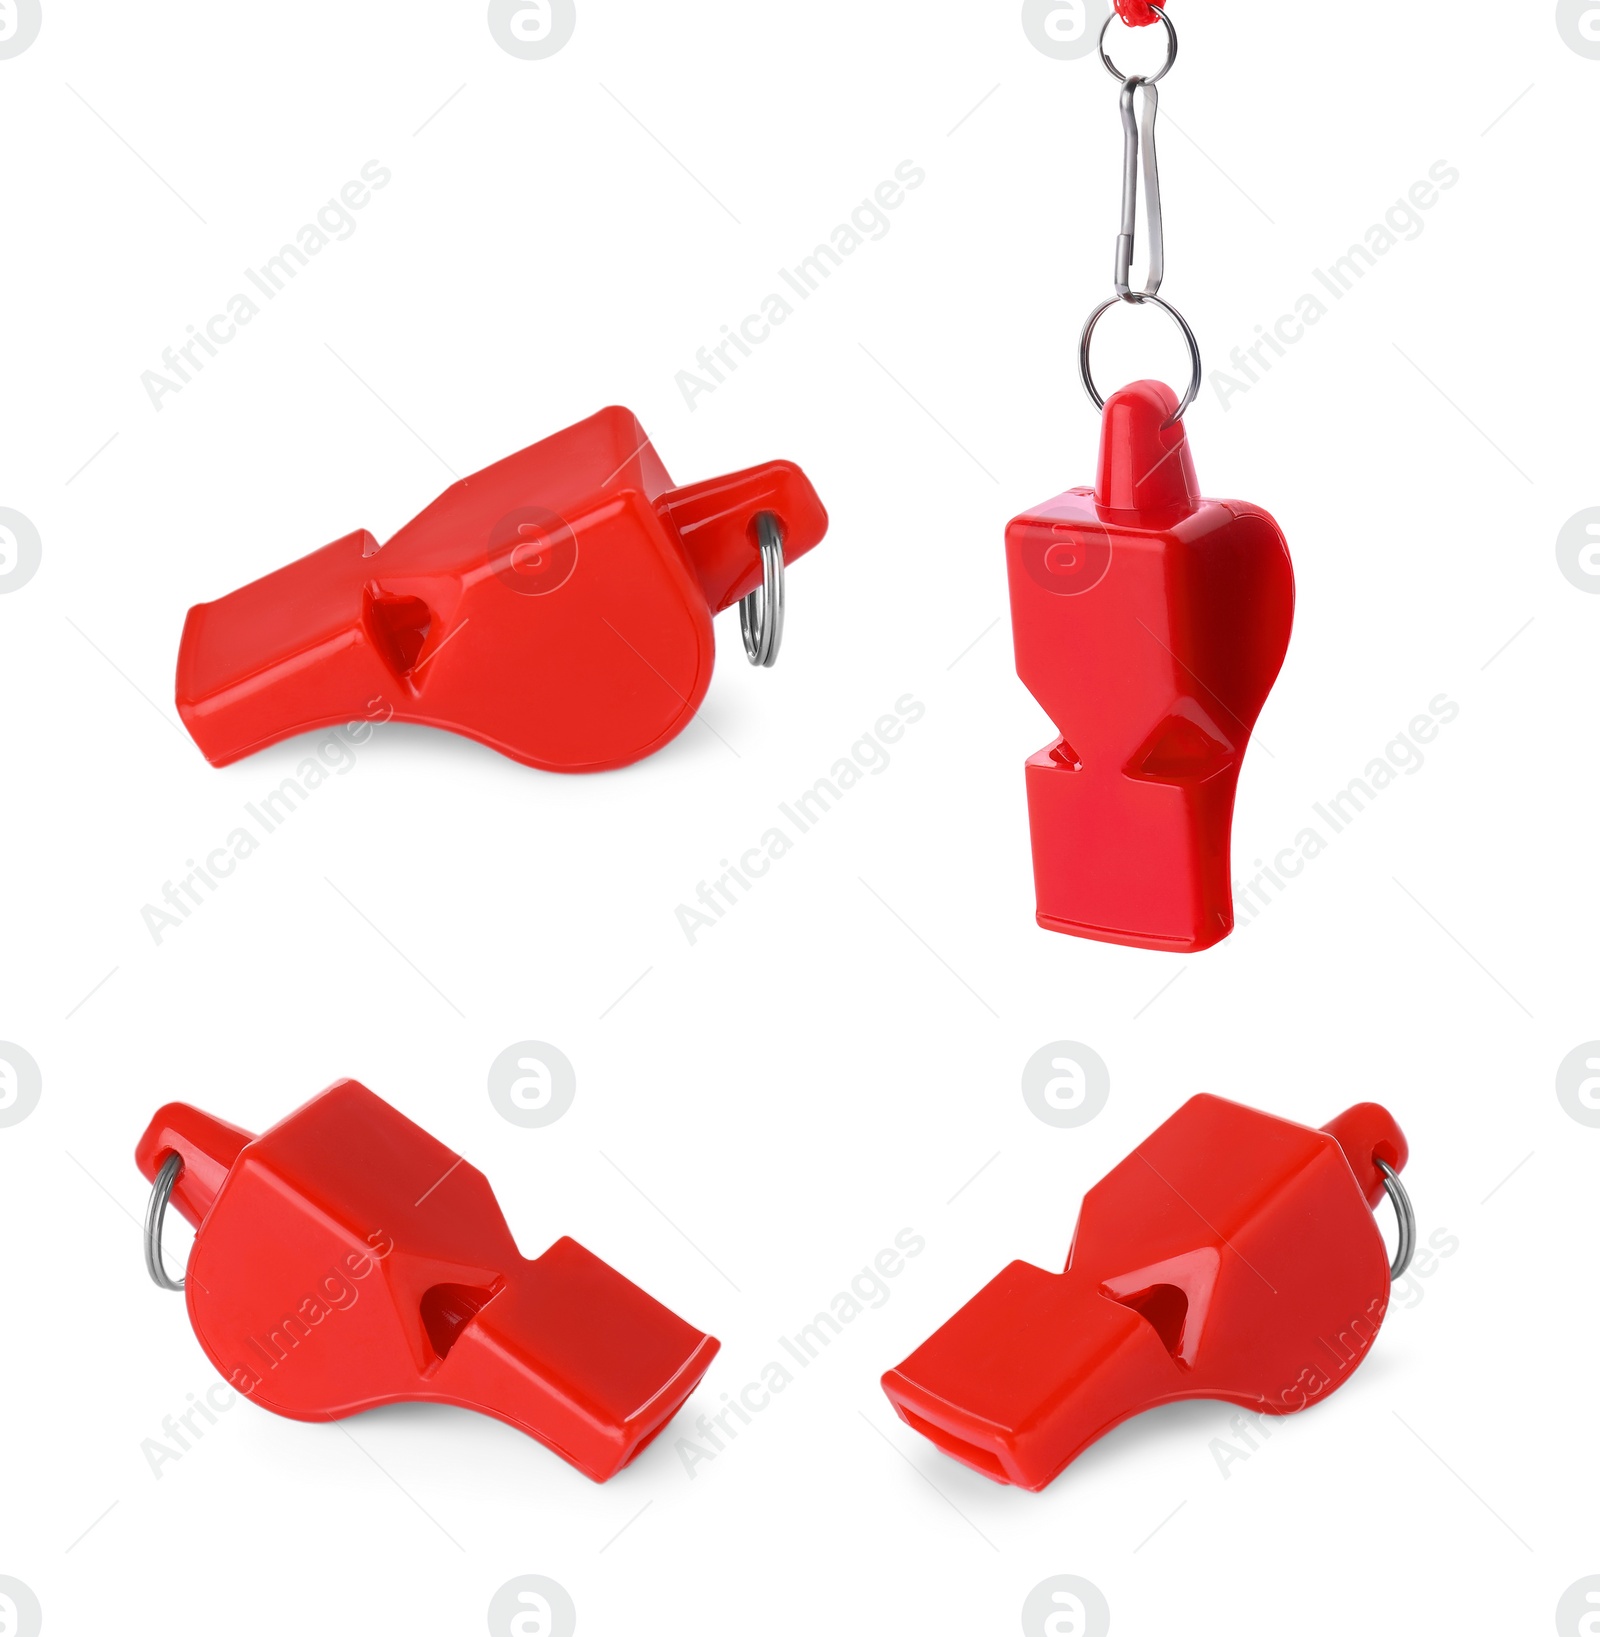 Image of Red whistle with cord isolated on white, set